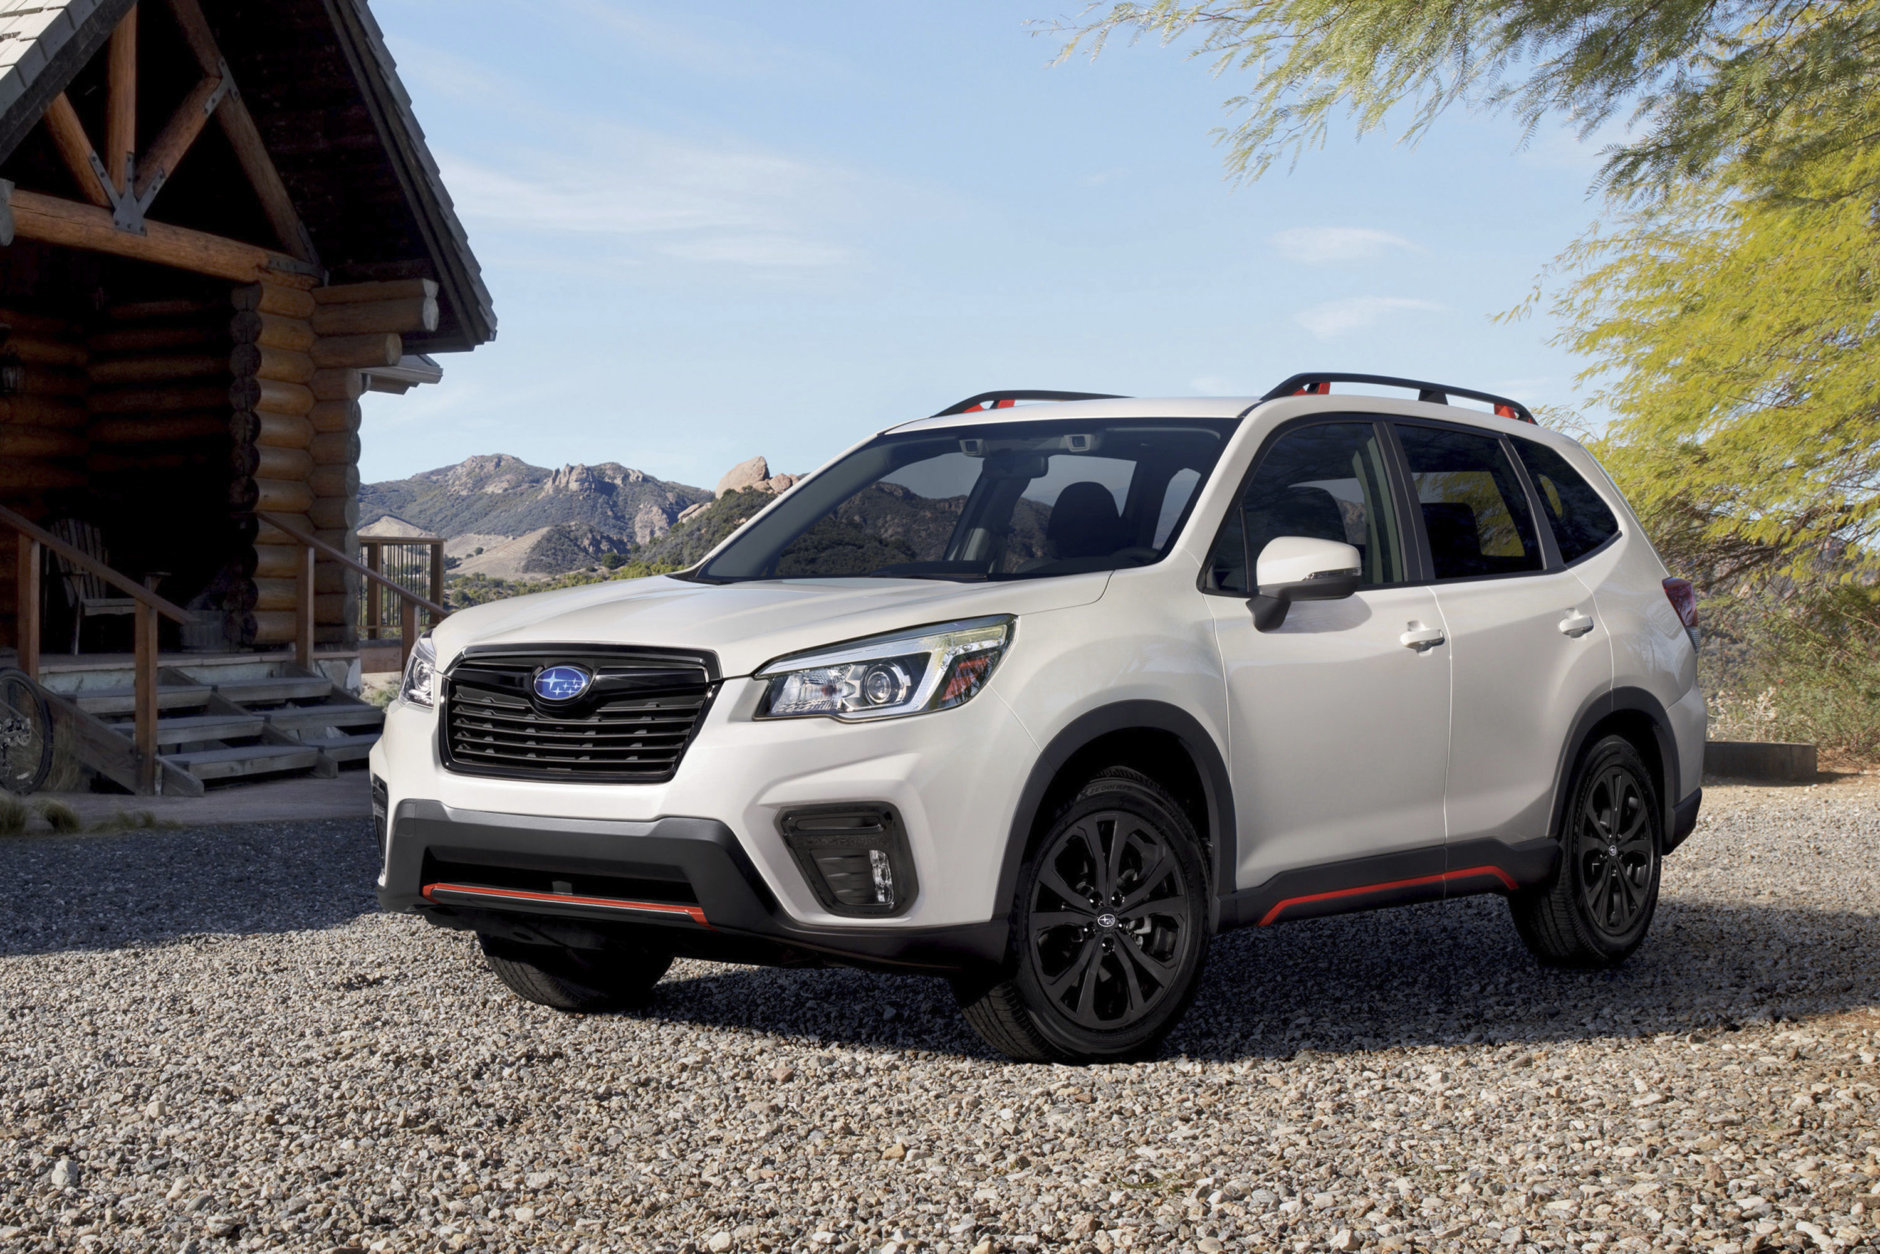 This undated photo provided by Subaru shows the Subaru Forester, a crossover that has both city and off-road capabilities. (Subaru via AP)